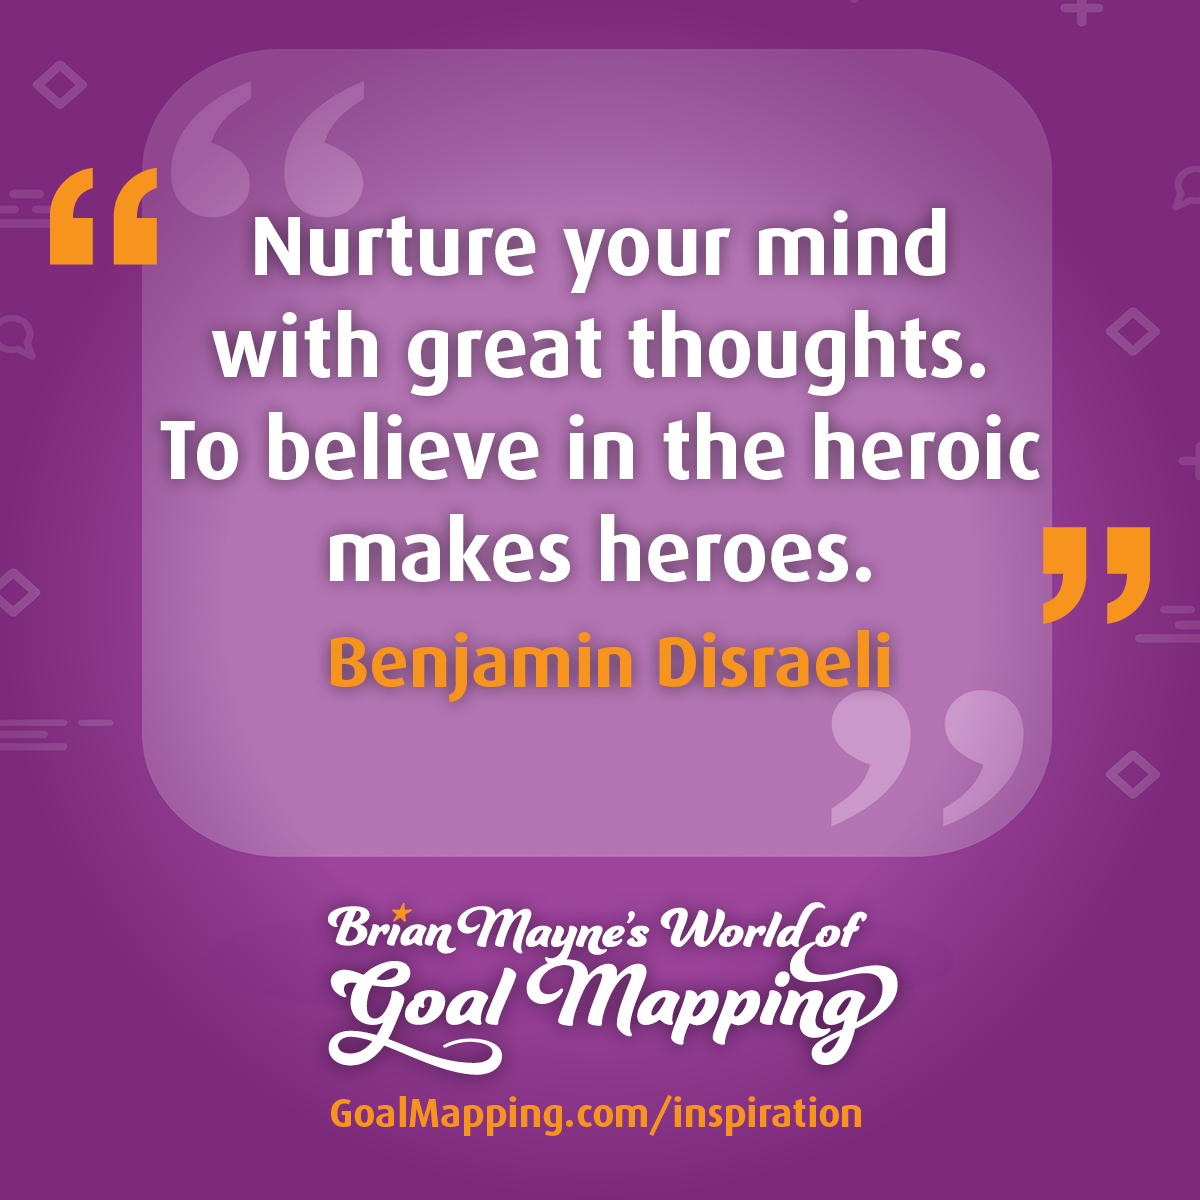 "Nurture your mind with great thoughts. To believe in the heroic makes heroes." Benjamin Disraeli